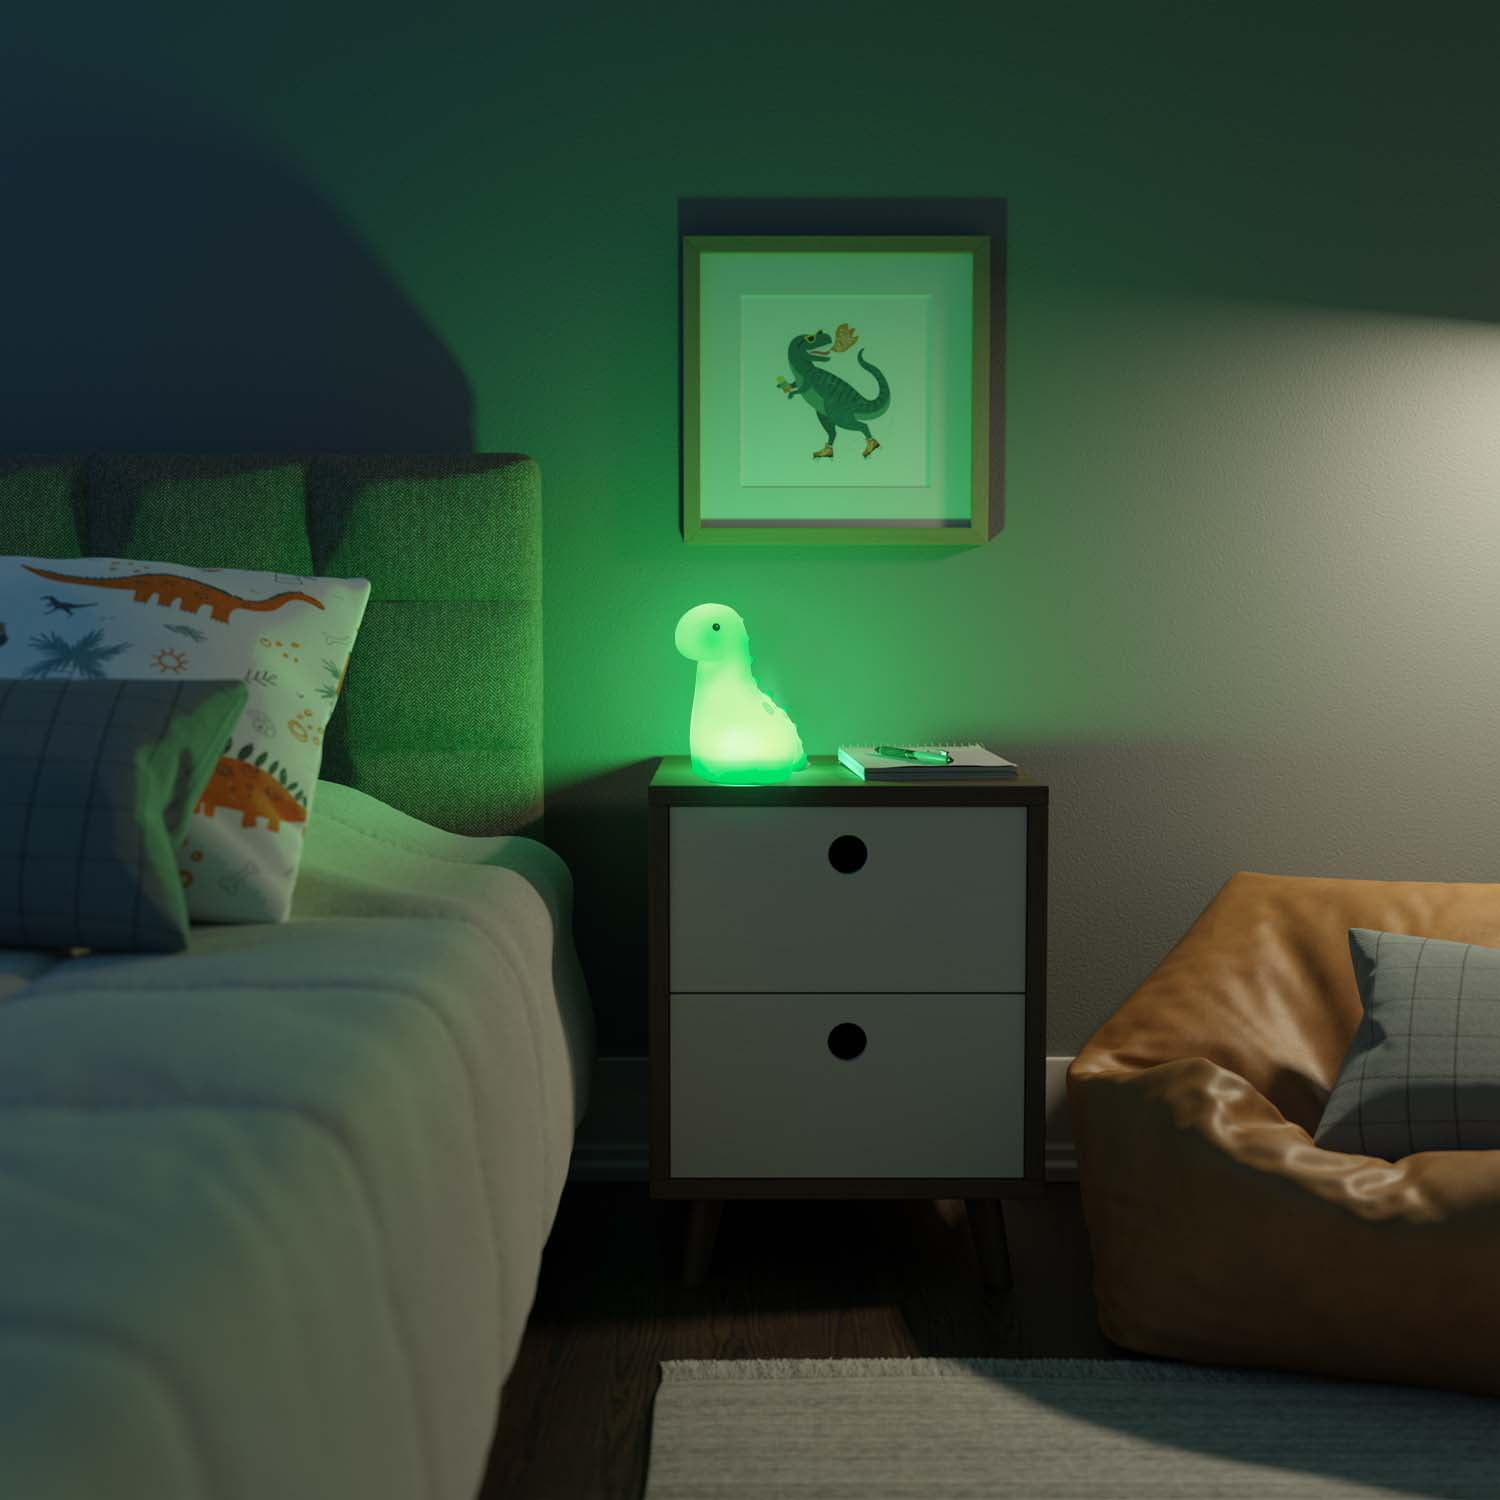 A nightlight shaped like a duck glows on a bedside table in a dimly lit child&#x27;s bedroom